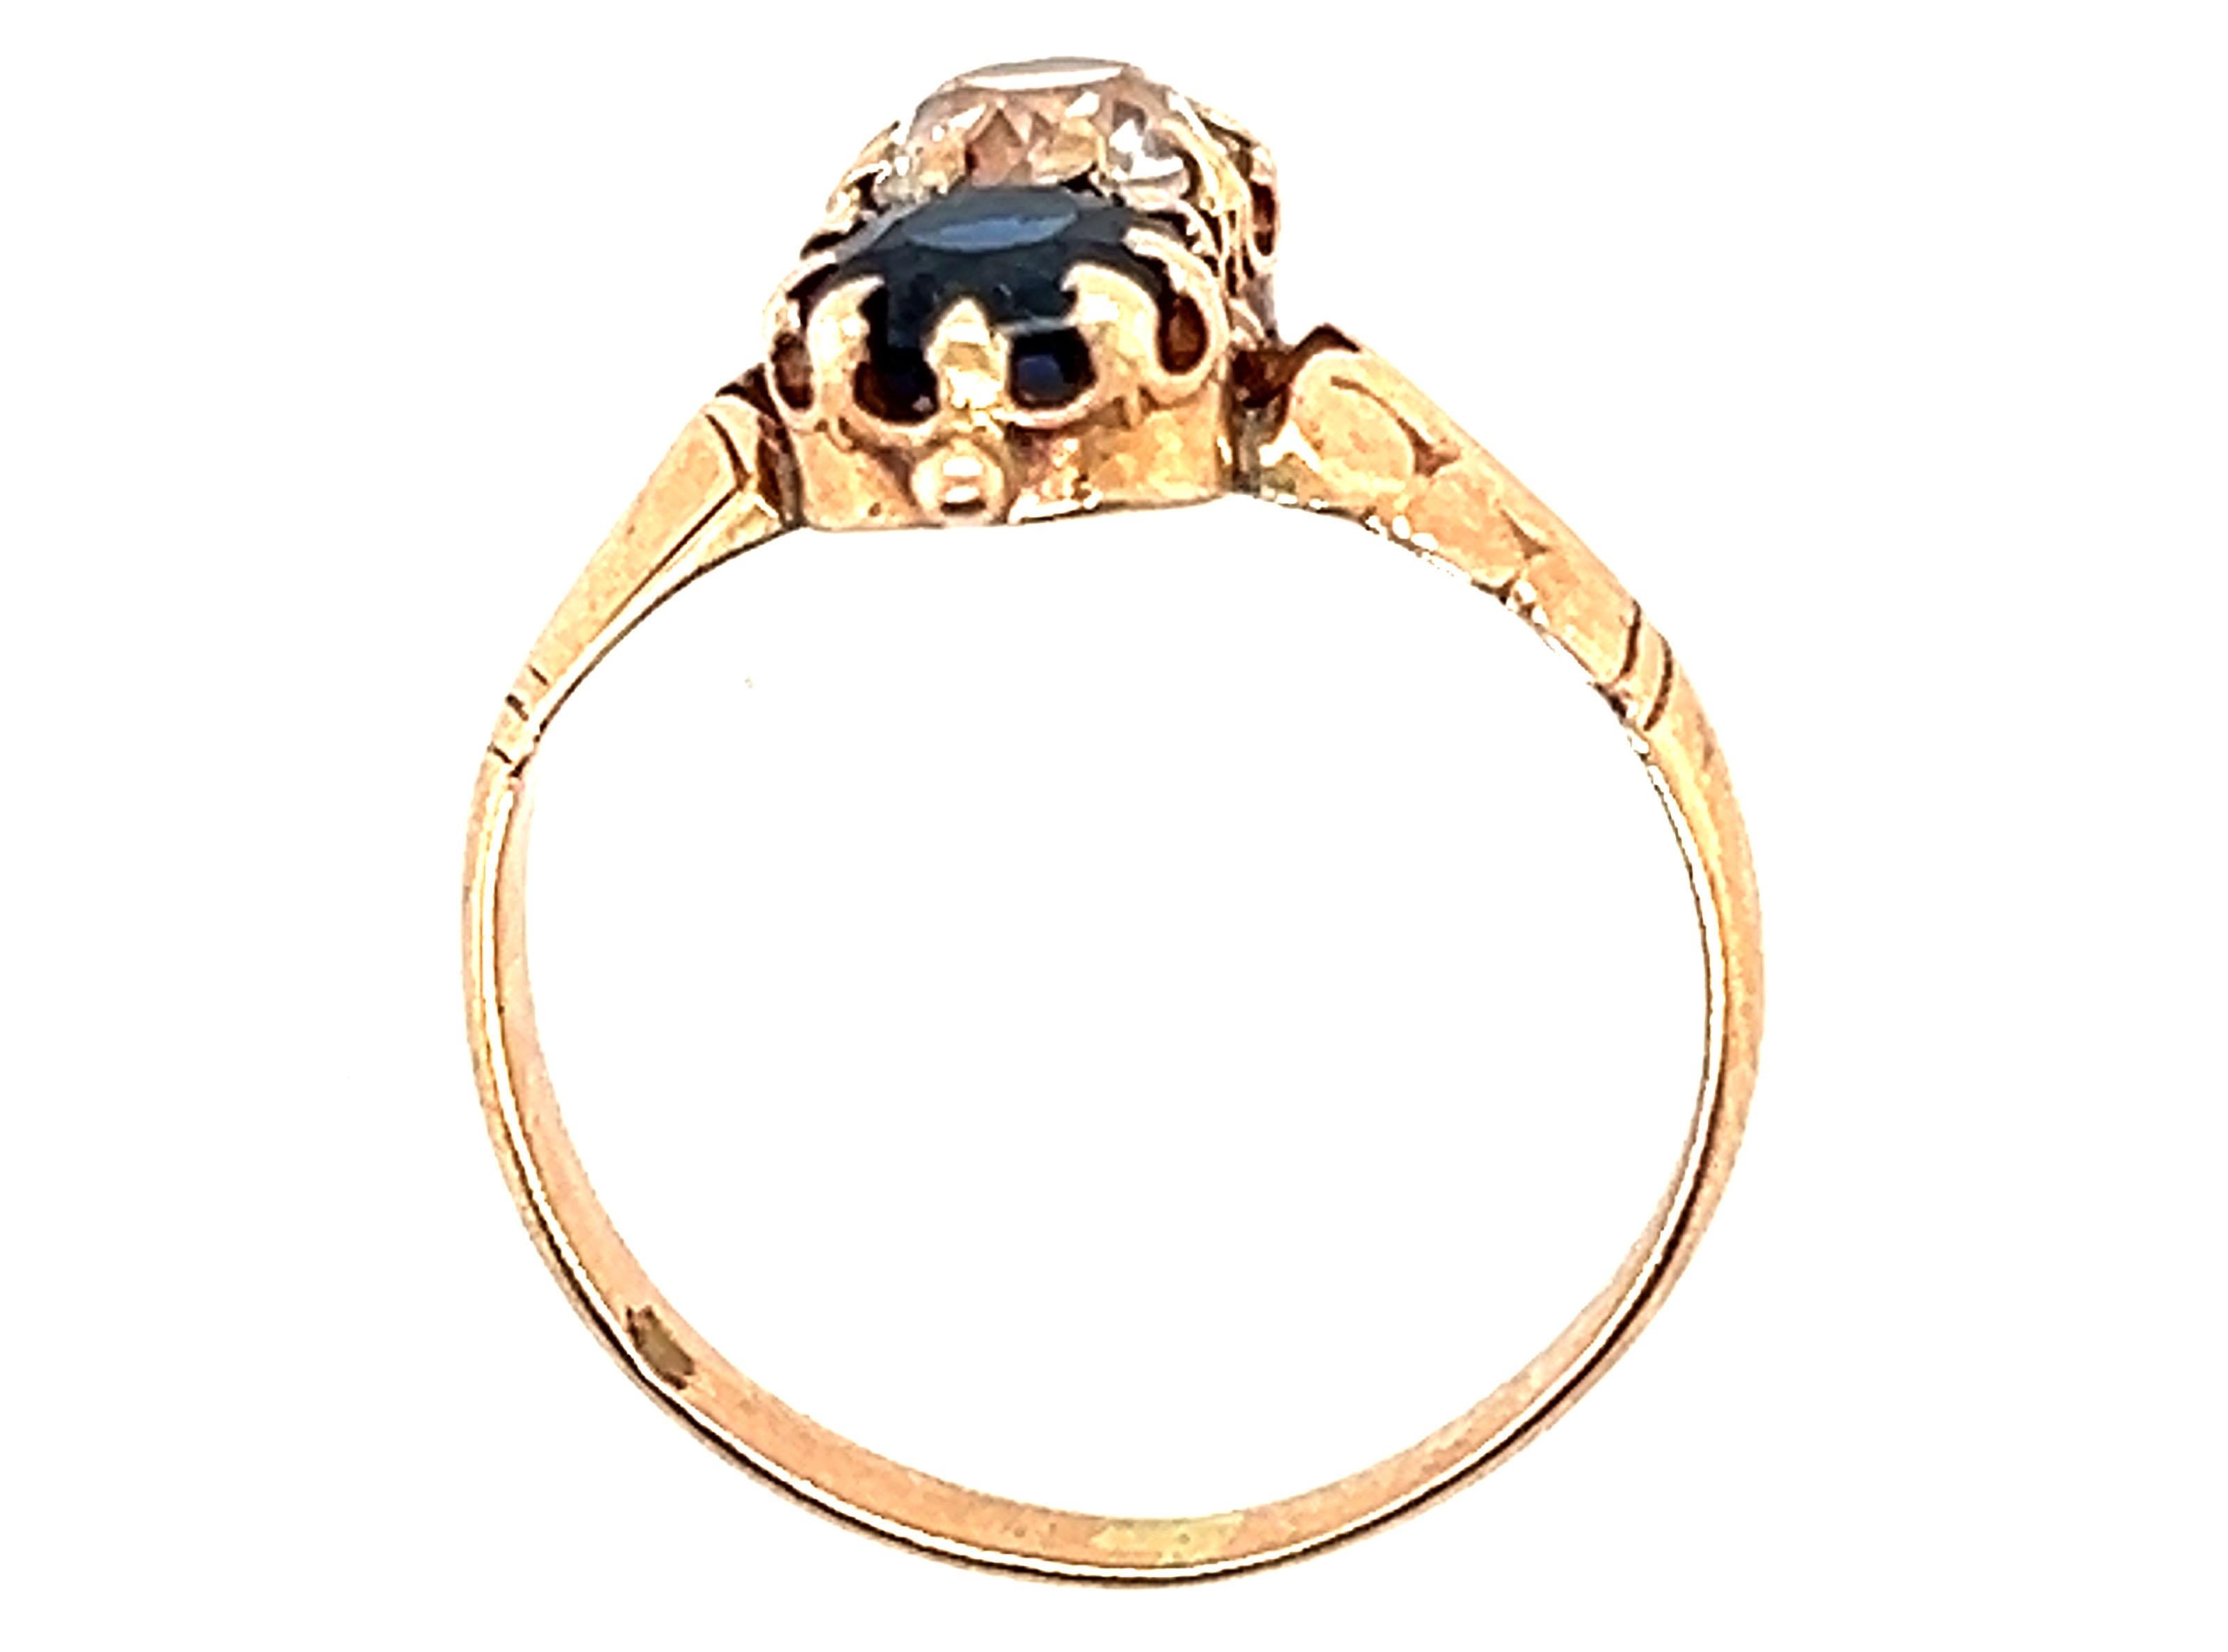 Genuine Original 1880's-1890's Victorian White Sapphire 2 Stone Ring .24ct Vintage Antique Yellow Gold 


Features Two Genuine Old Cut Round Sapphire Gemstones 

Blue Sapphire is The Birthstone for September

Lovely Patina Proves It's